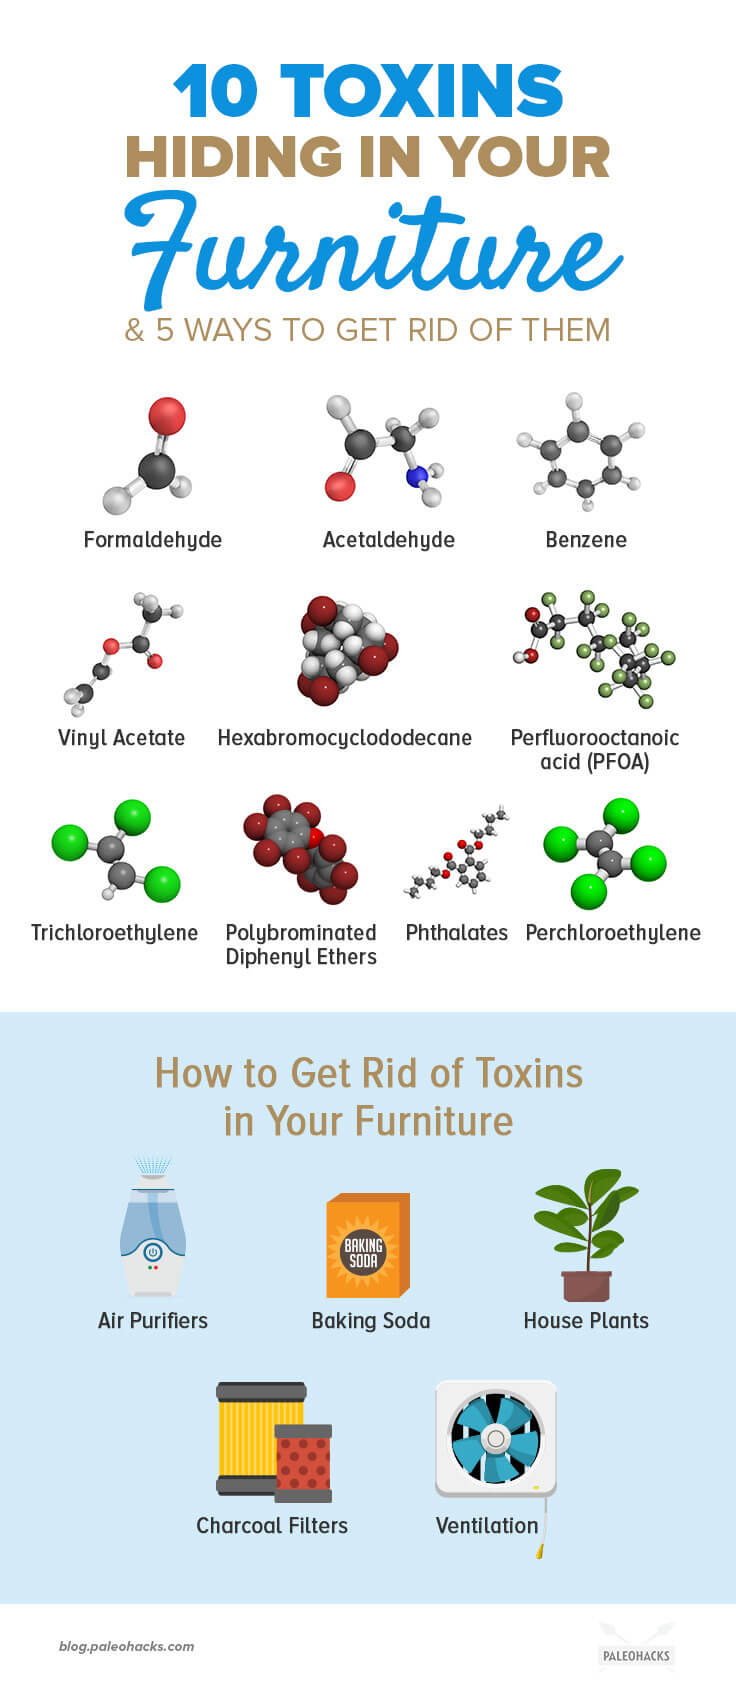 Toxins can be lurking in your favorite couch, mattress and even bookcase. Here’s how to get rid of toxins hiding in your furniture.